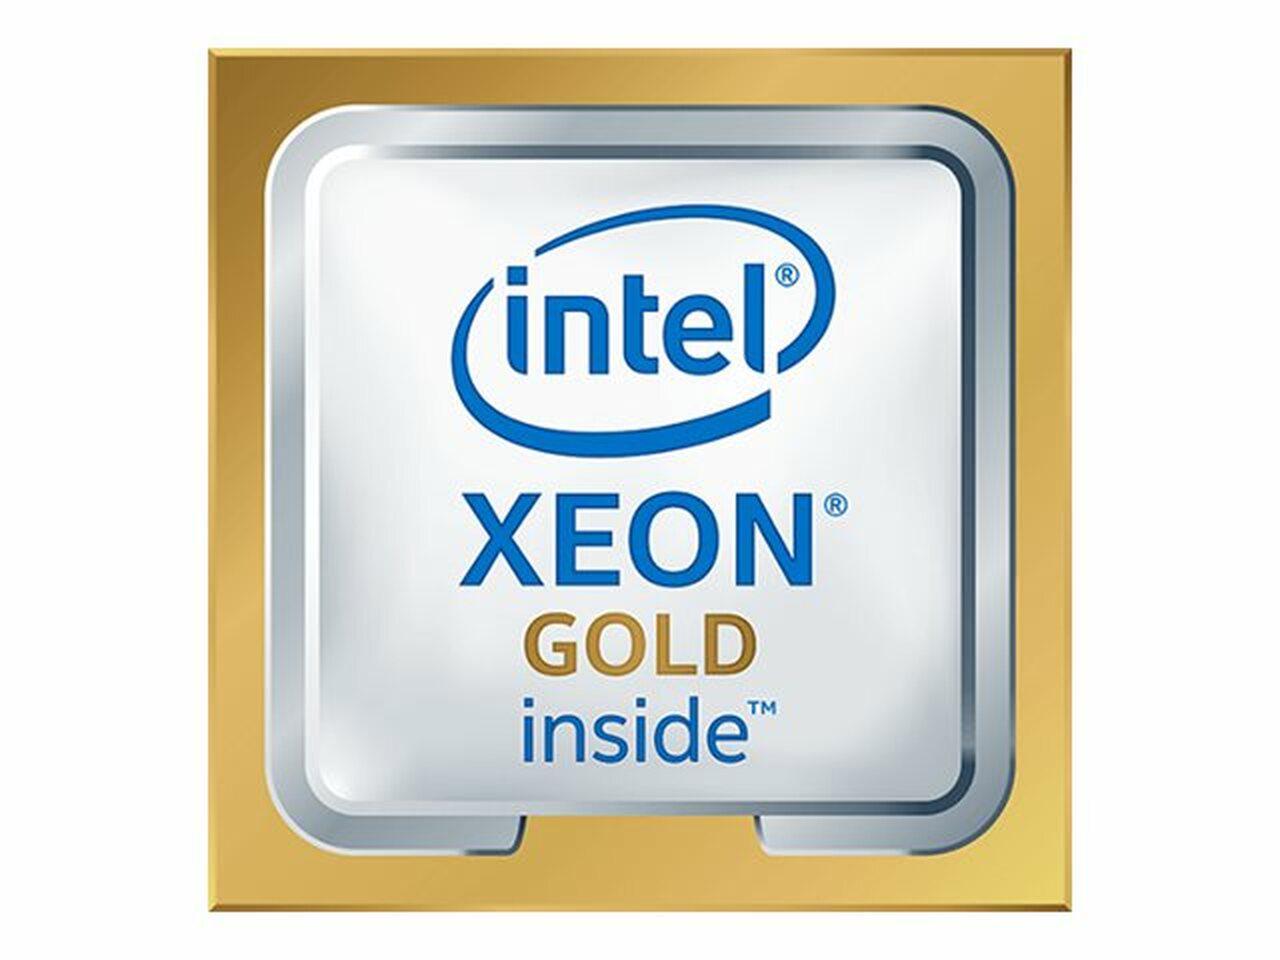 Intel CPU CD8068904571601 Xeon GOLD 6354 ICLK TRAY 18Cores/36Threads 3.0Ghz 39MB Bare